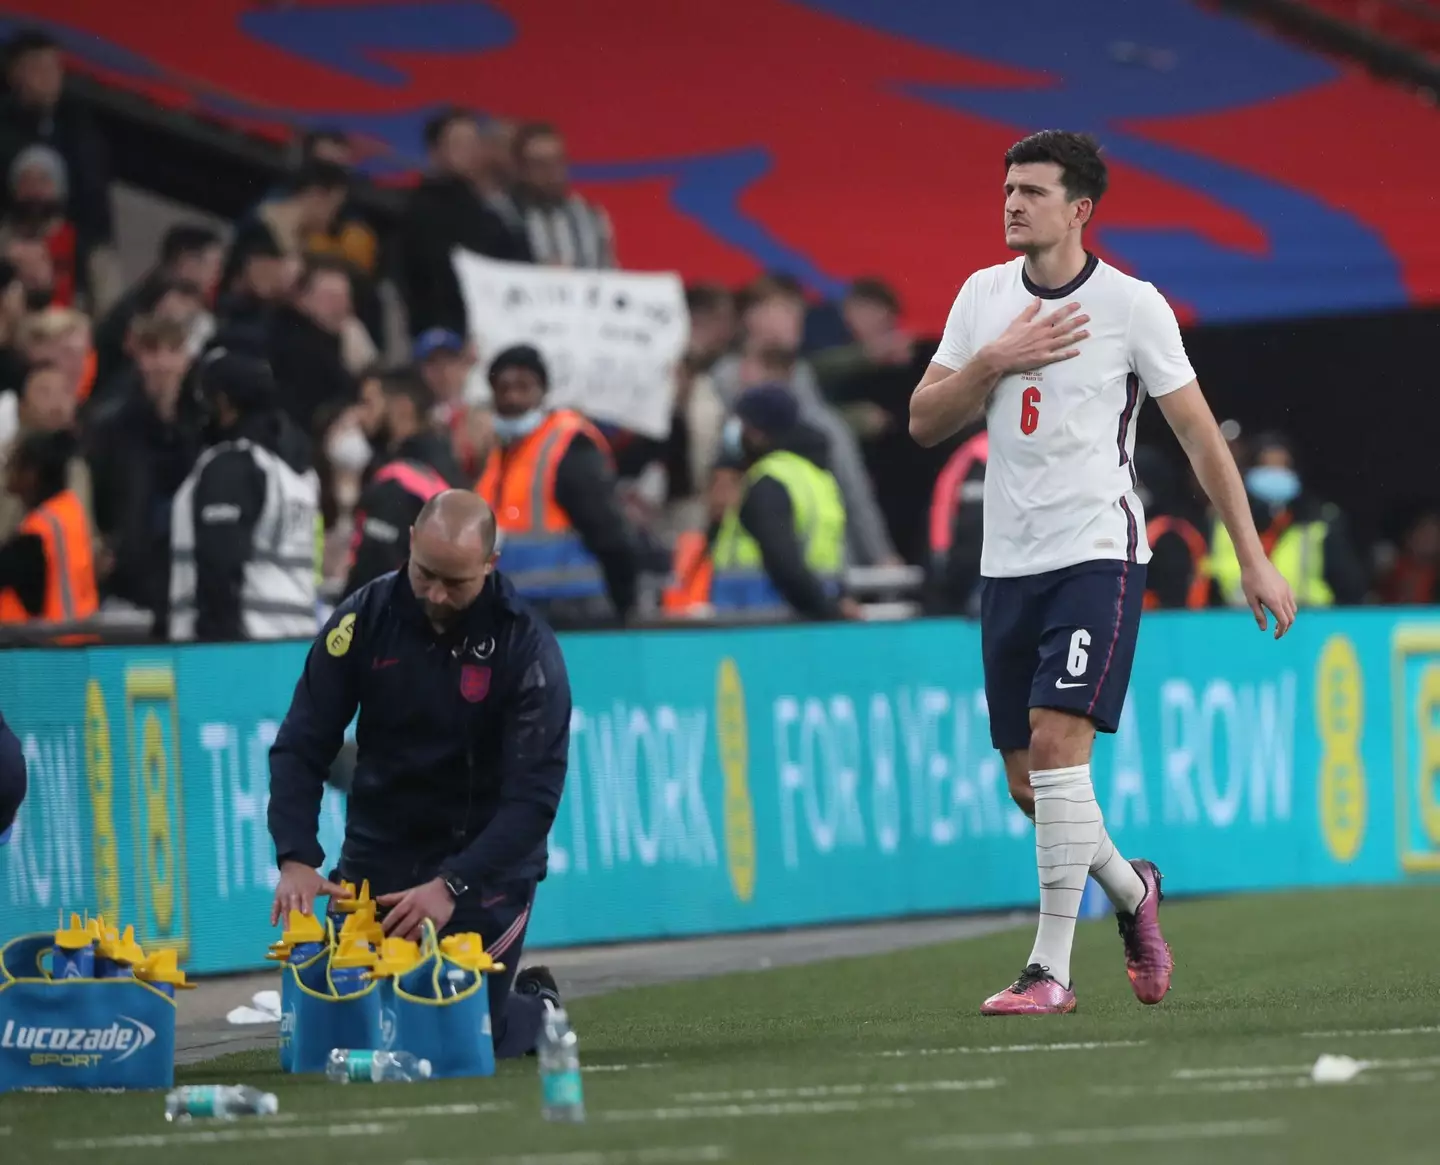 Maguire was booed by some England fans in Tuesday's friendly against the Ivory Coast (Image: PA)